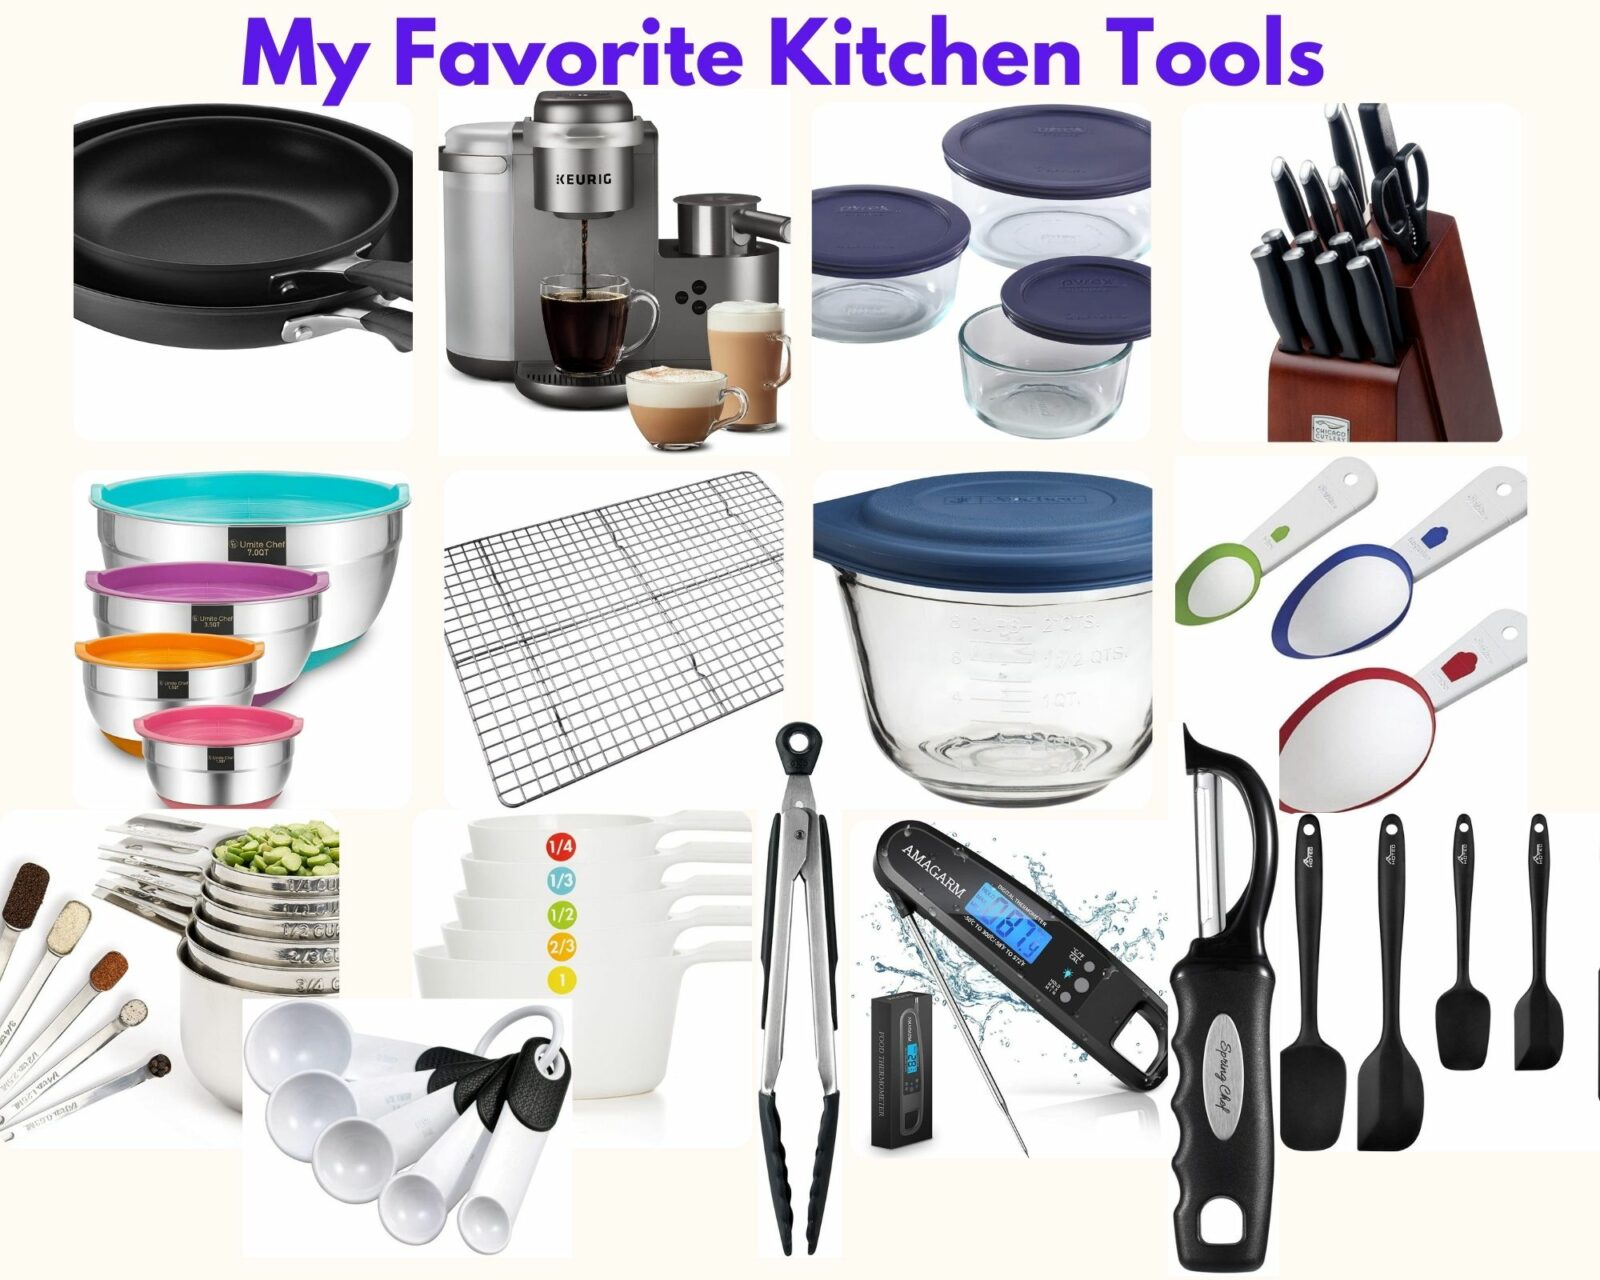 12 of Our Favorite Kitchen Tools Made in the USA